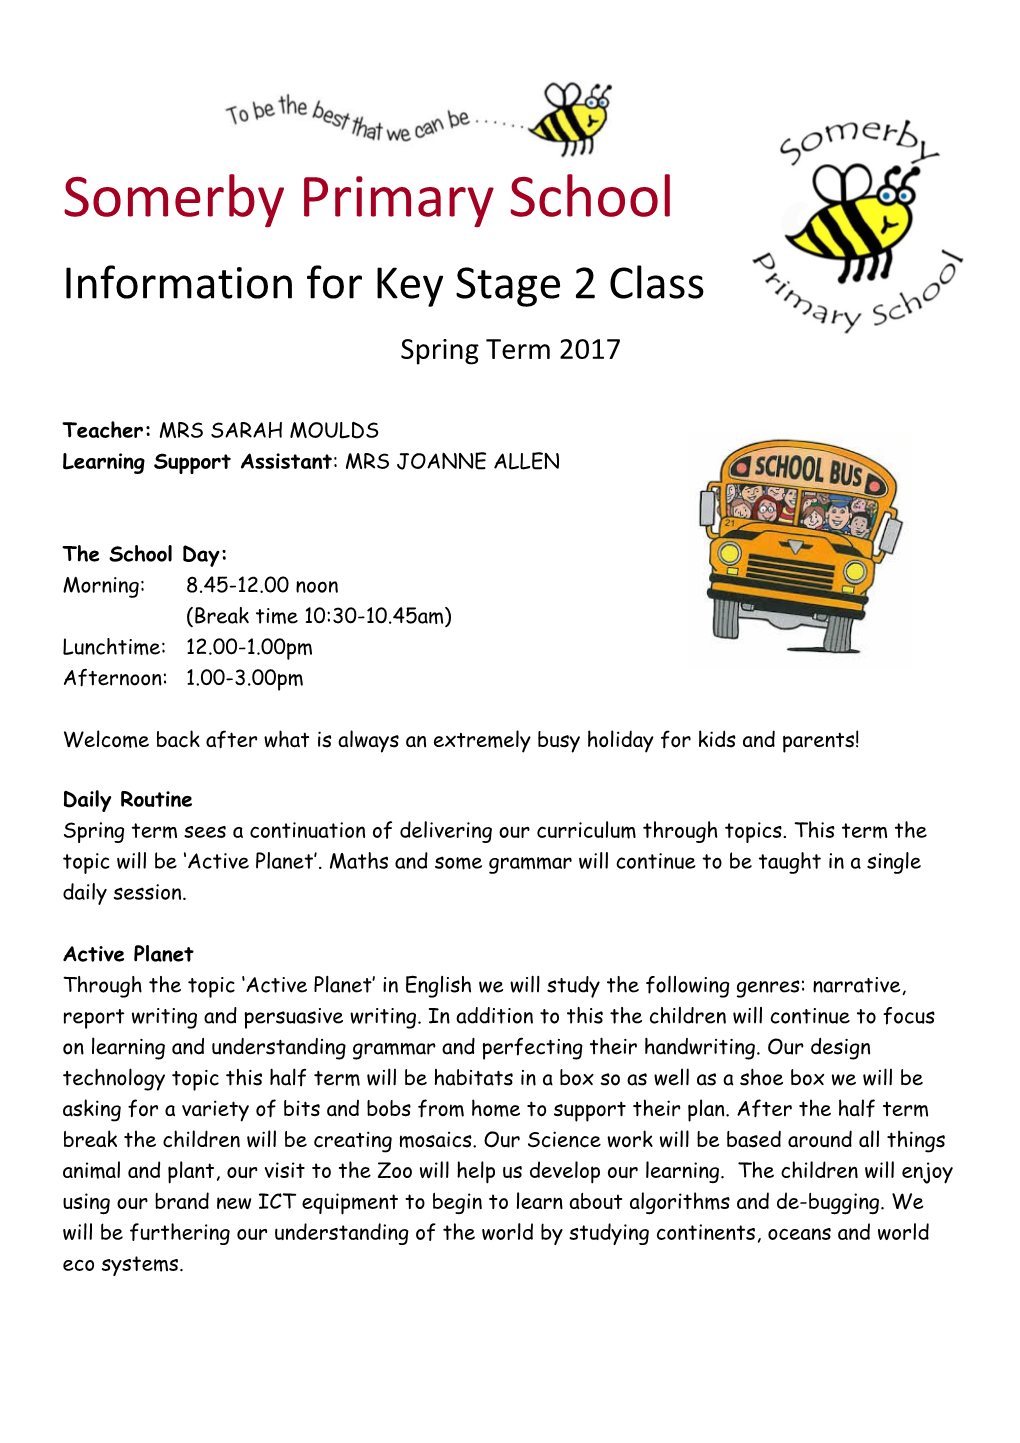 Information for Key Stage 2 Class